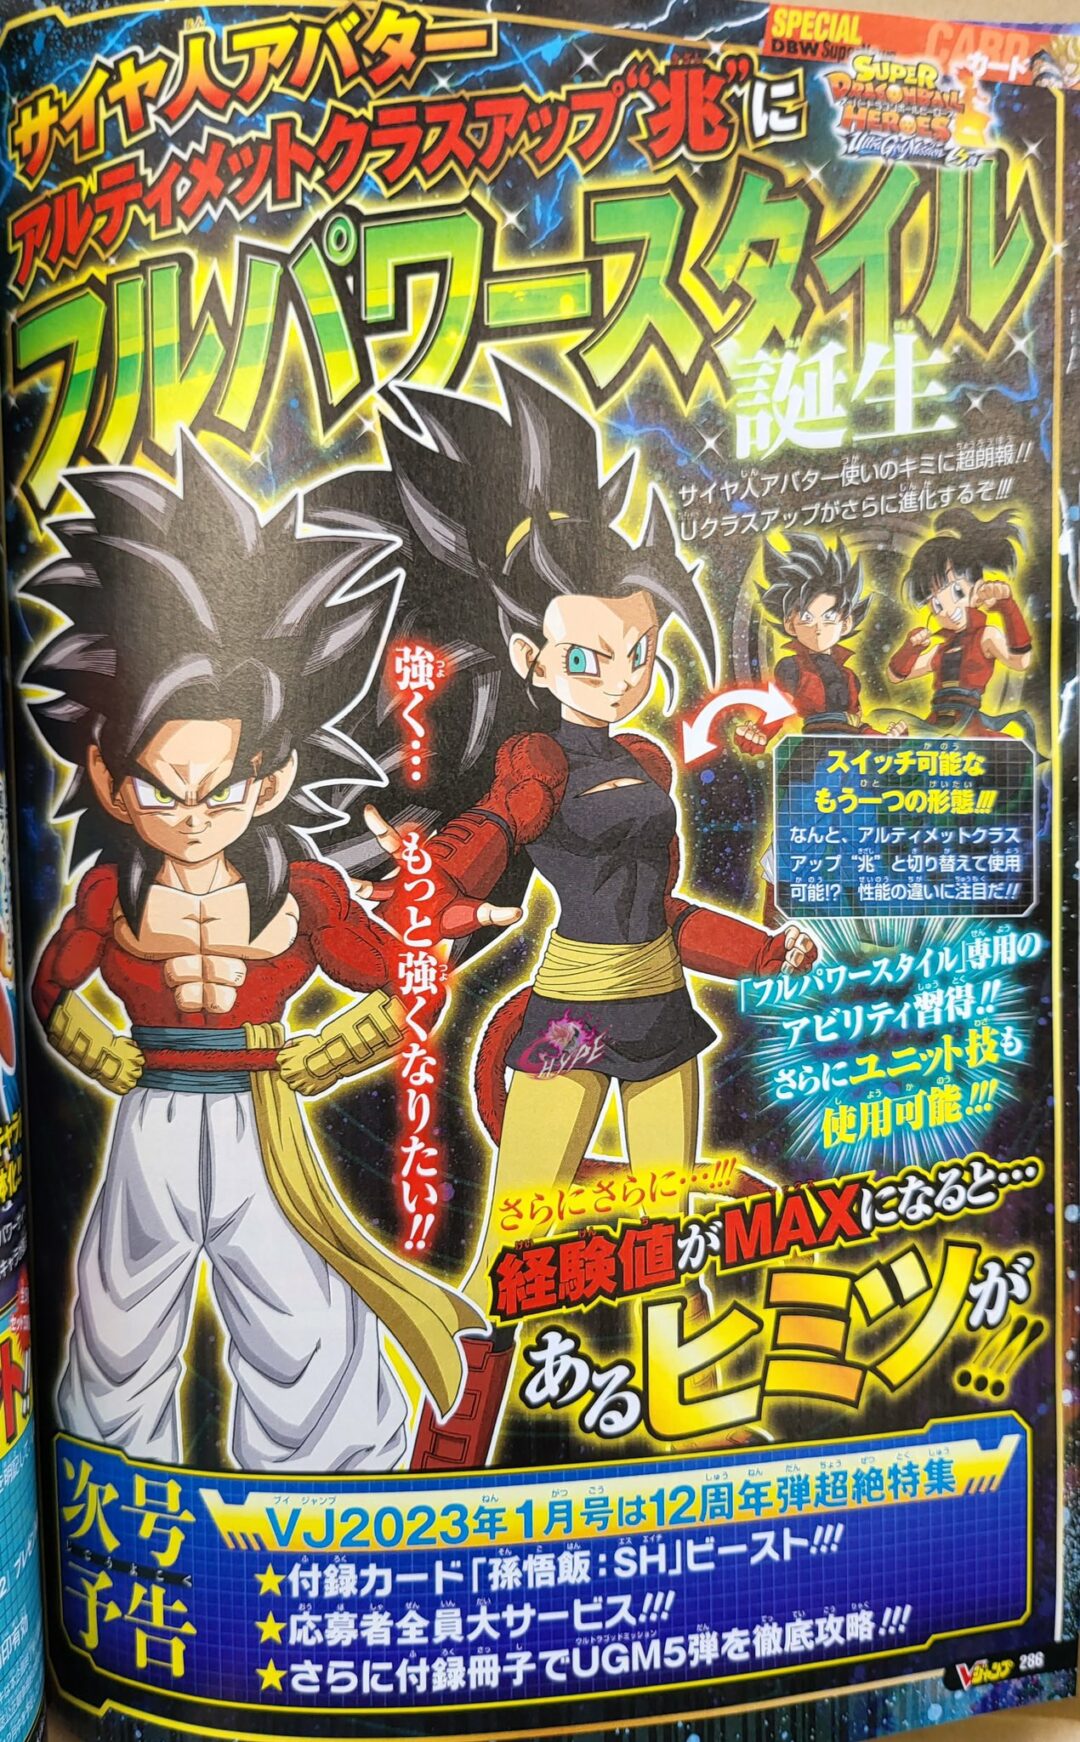 SDBH VJump Octobre SDBH UGM5 page 4